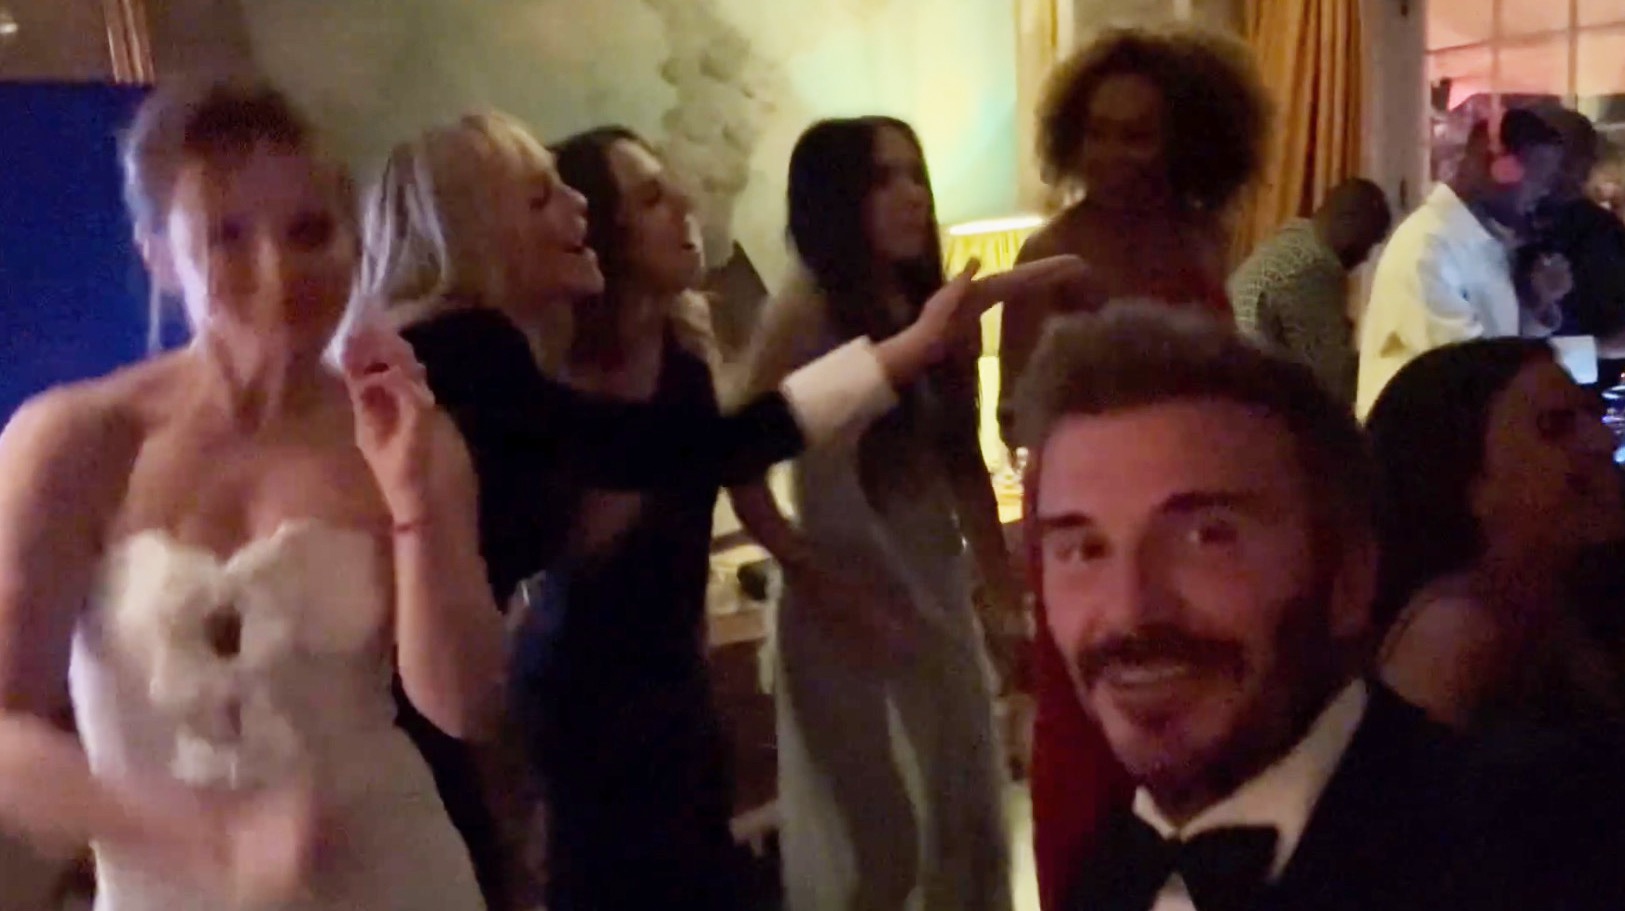 The women treated Victoria's guests to a rare Spice Girls performance